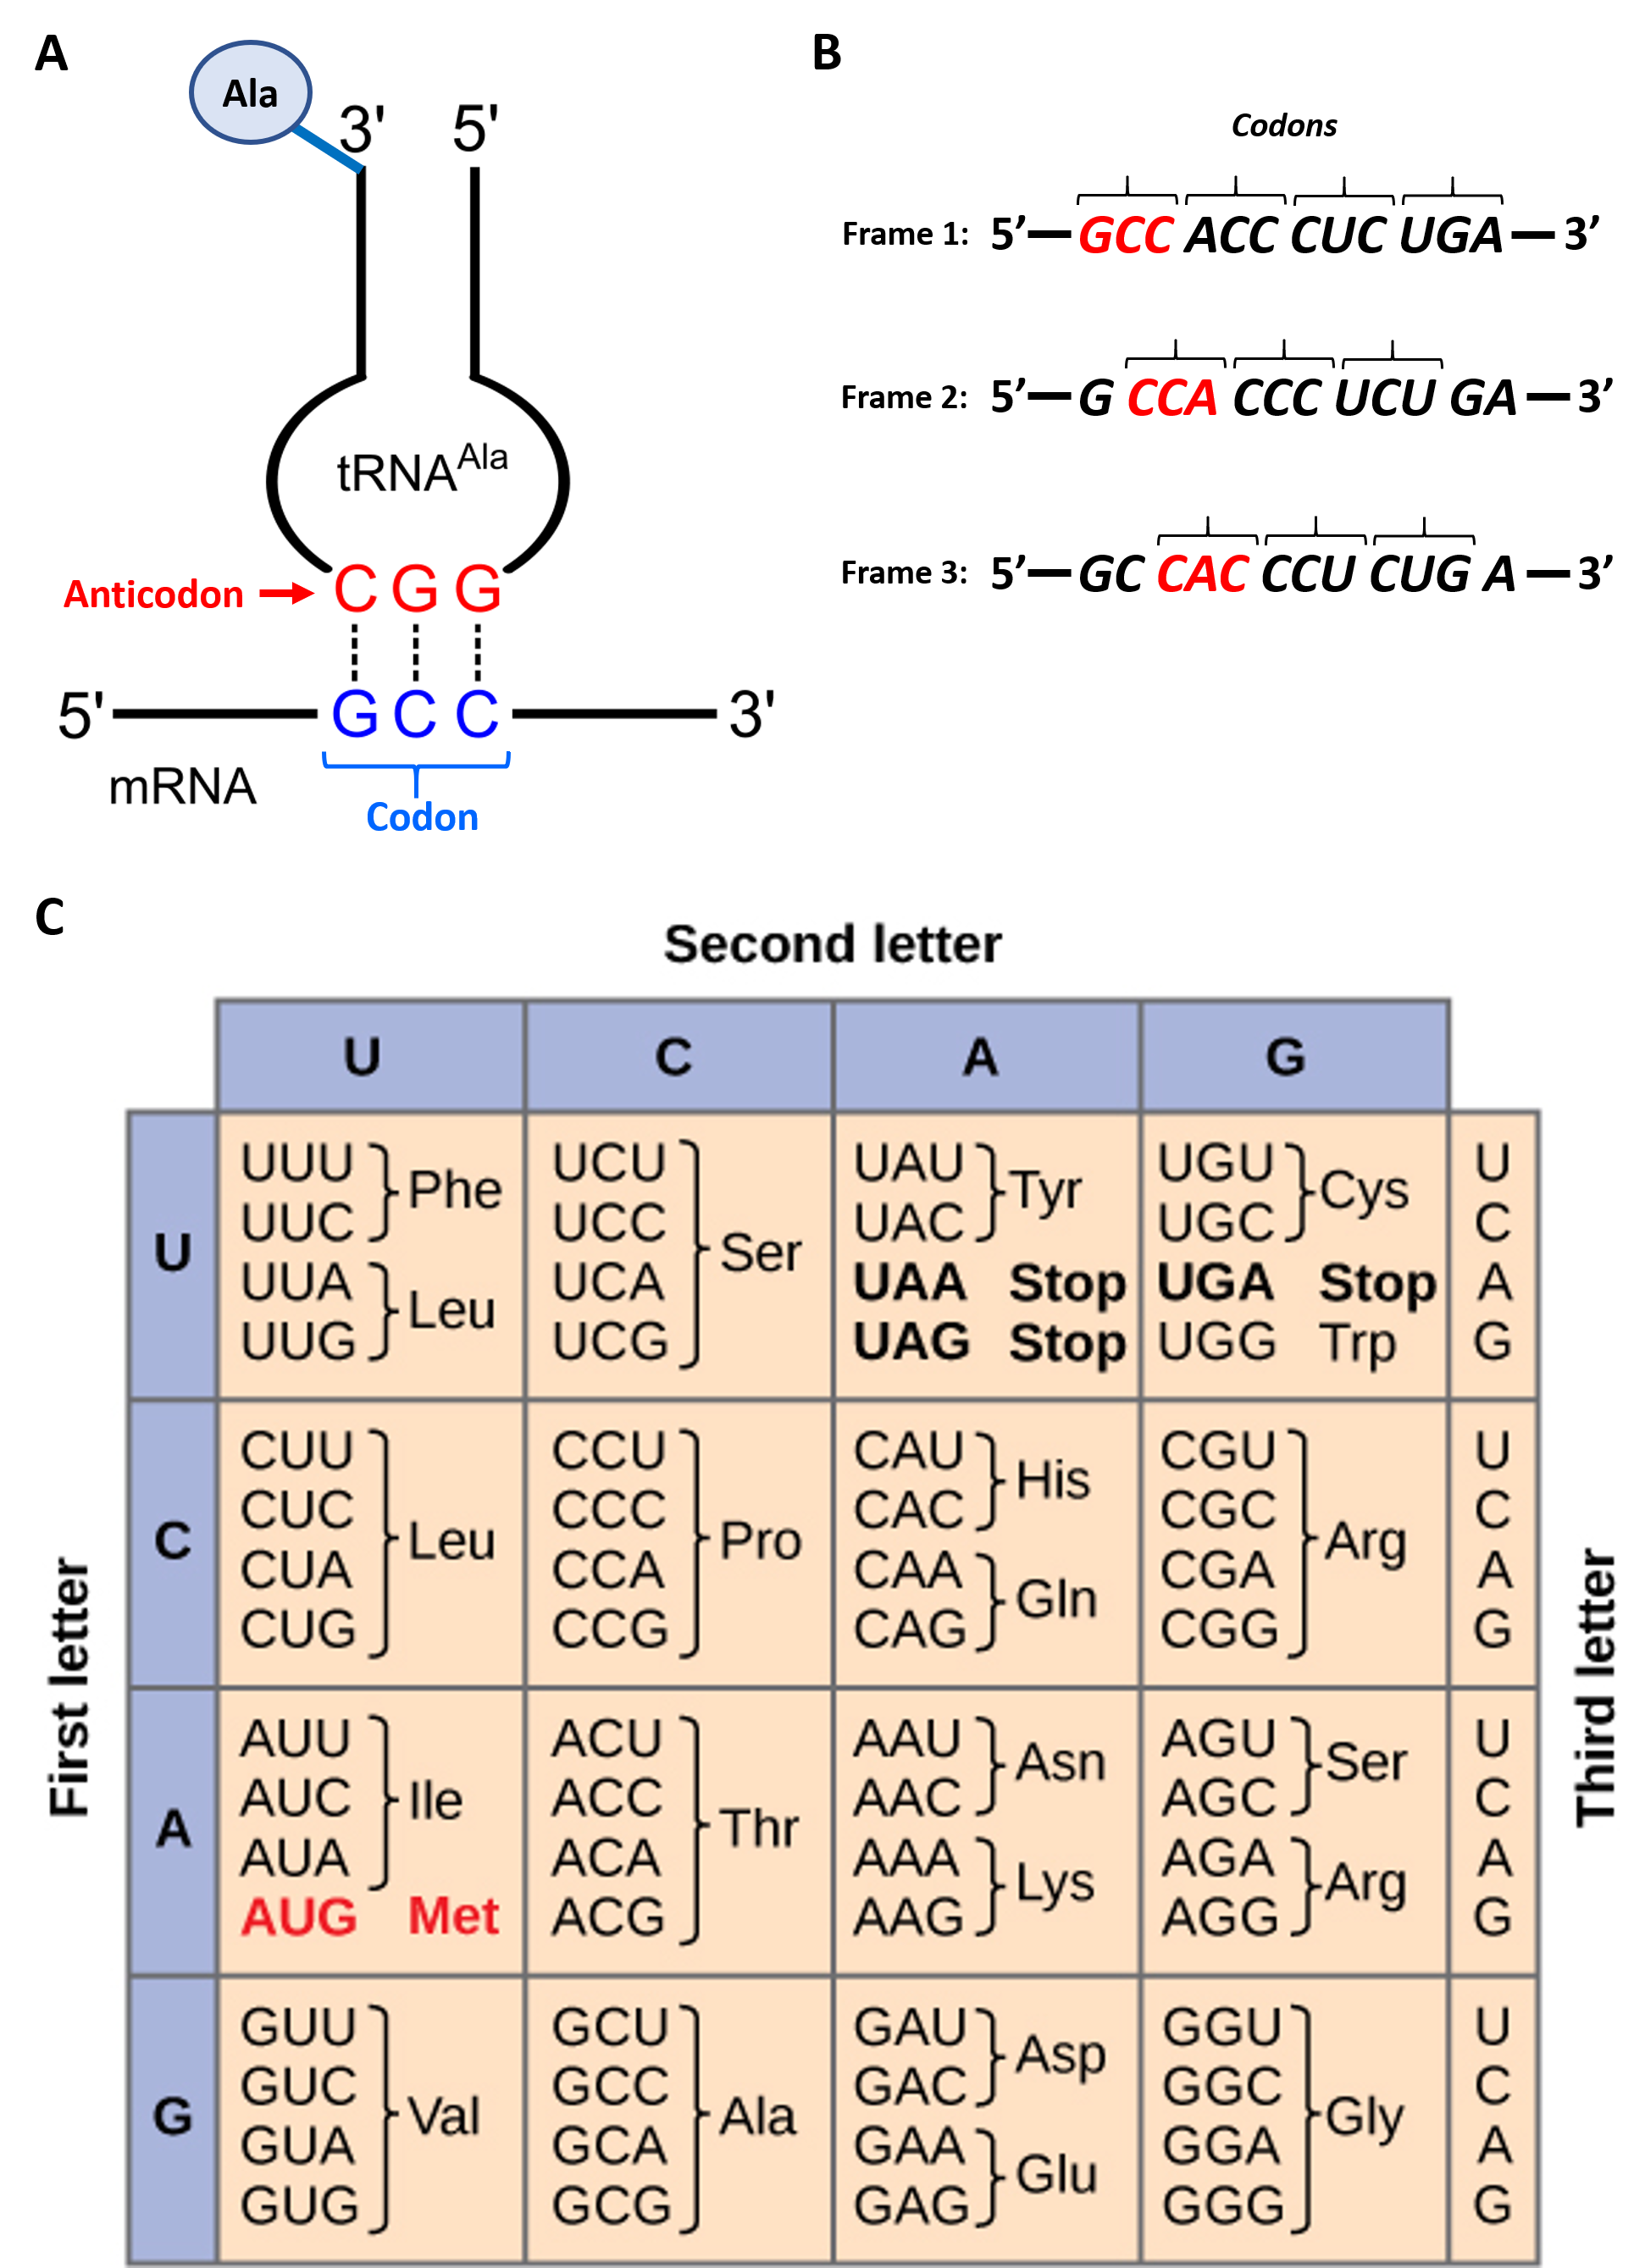 Figure 11.3 Reading the mRNA Template